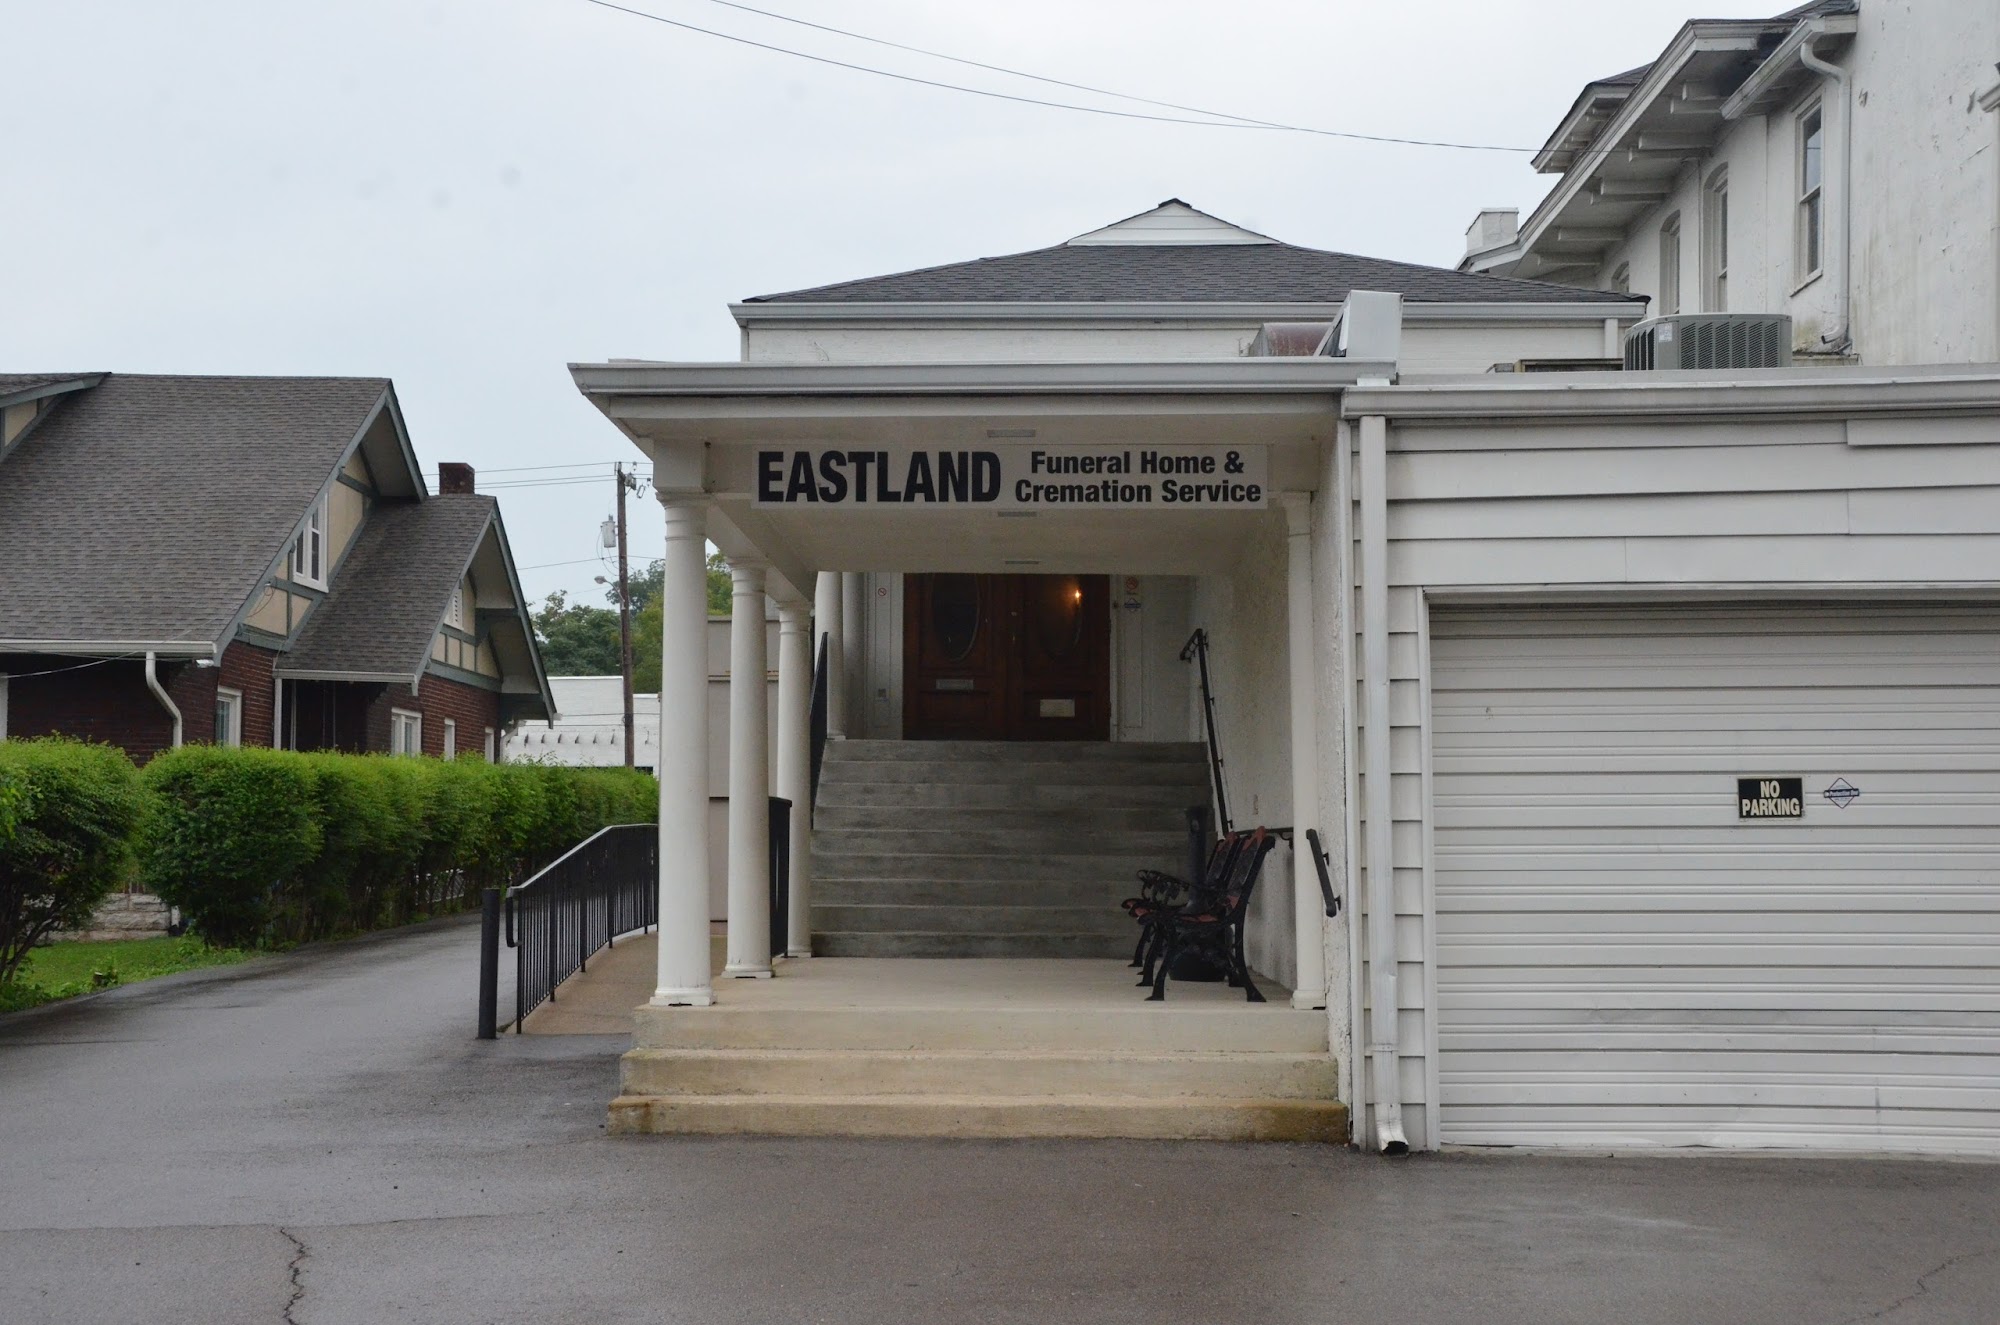 Eastland Funeral Home & Cremation Service